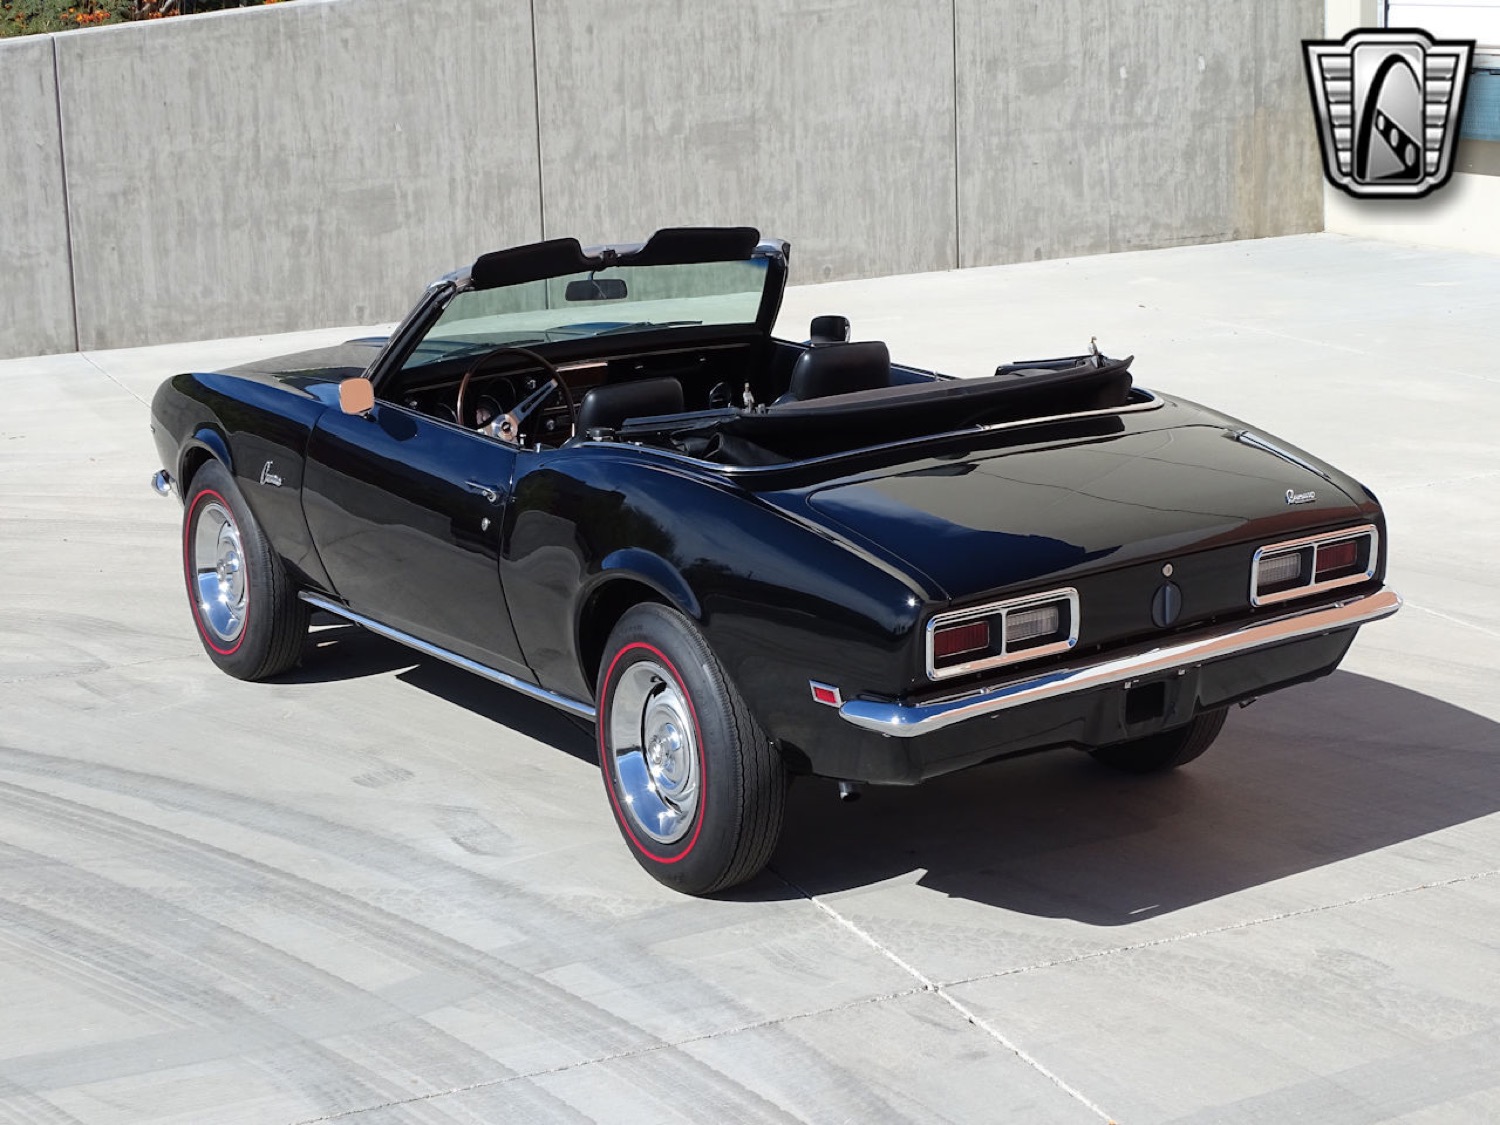 Triple Black '68 Chevy Camaro Restoration Up For Sale: Video | GM Authority